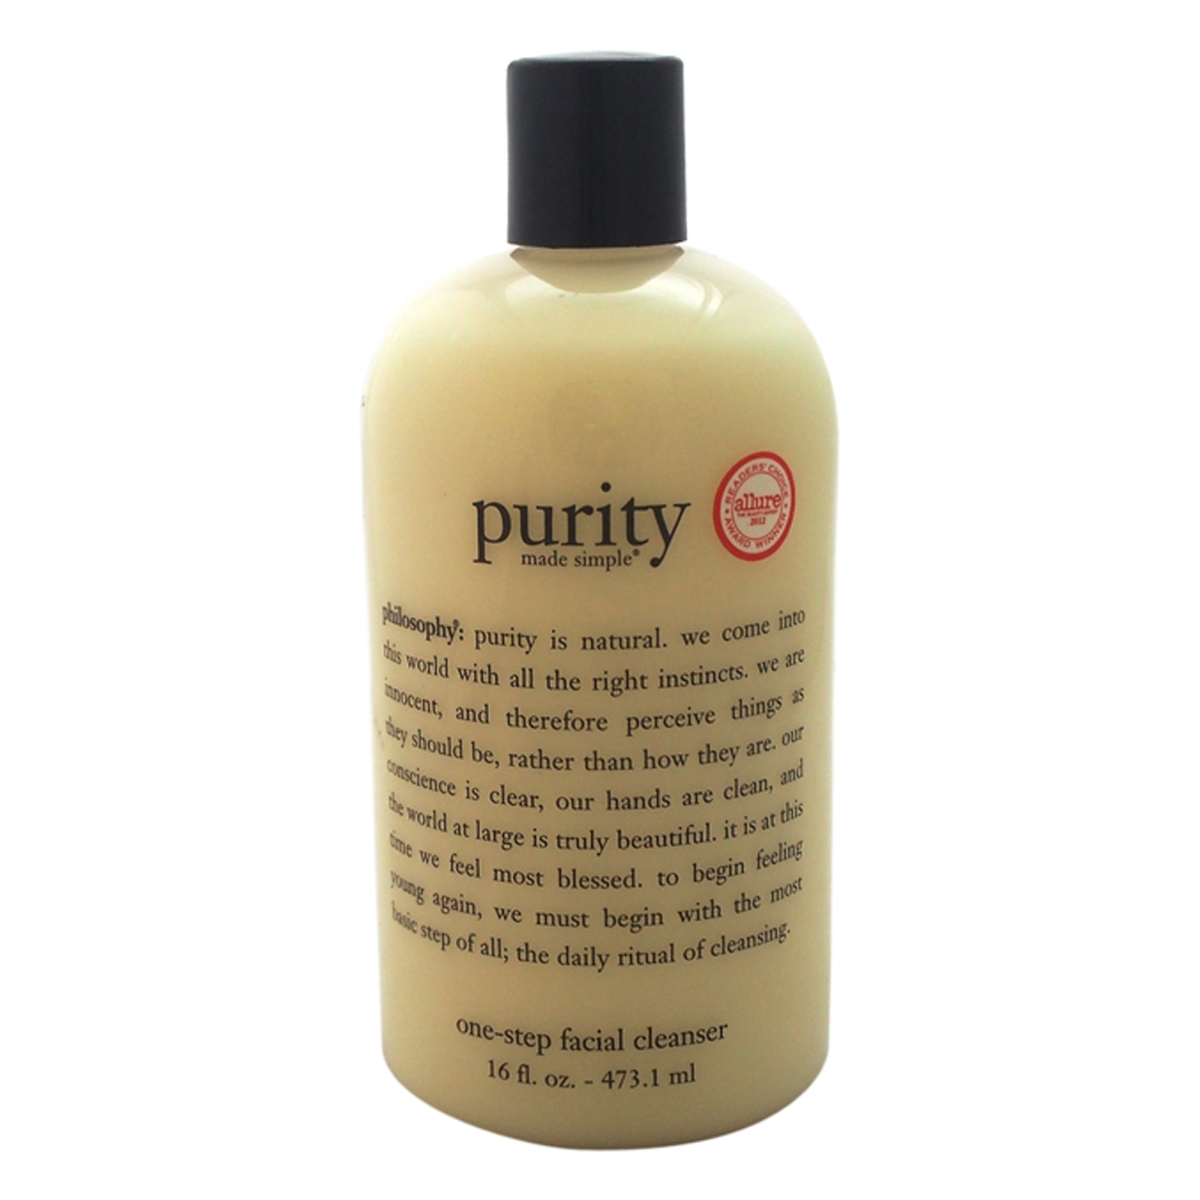 U-SC-3704 16 oz Unisex Purity Made Simple One Step Facial Cleanser -  Philosophy